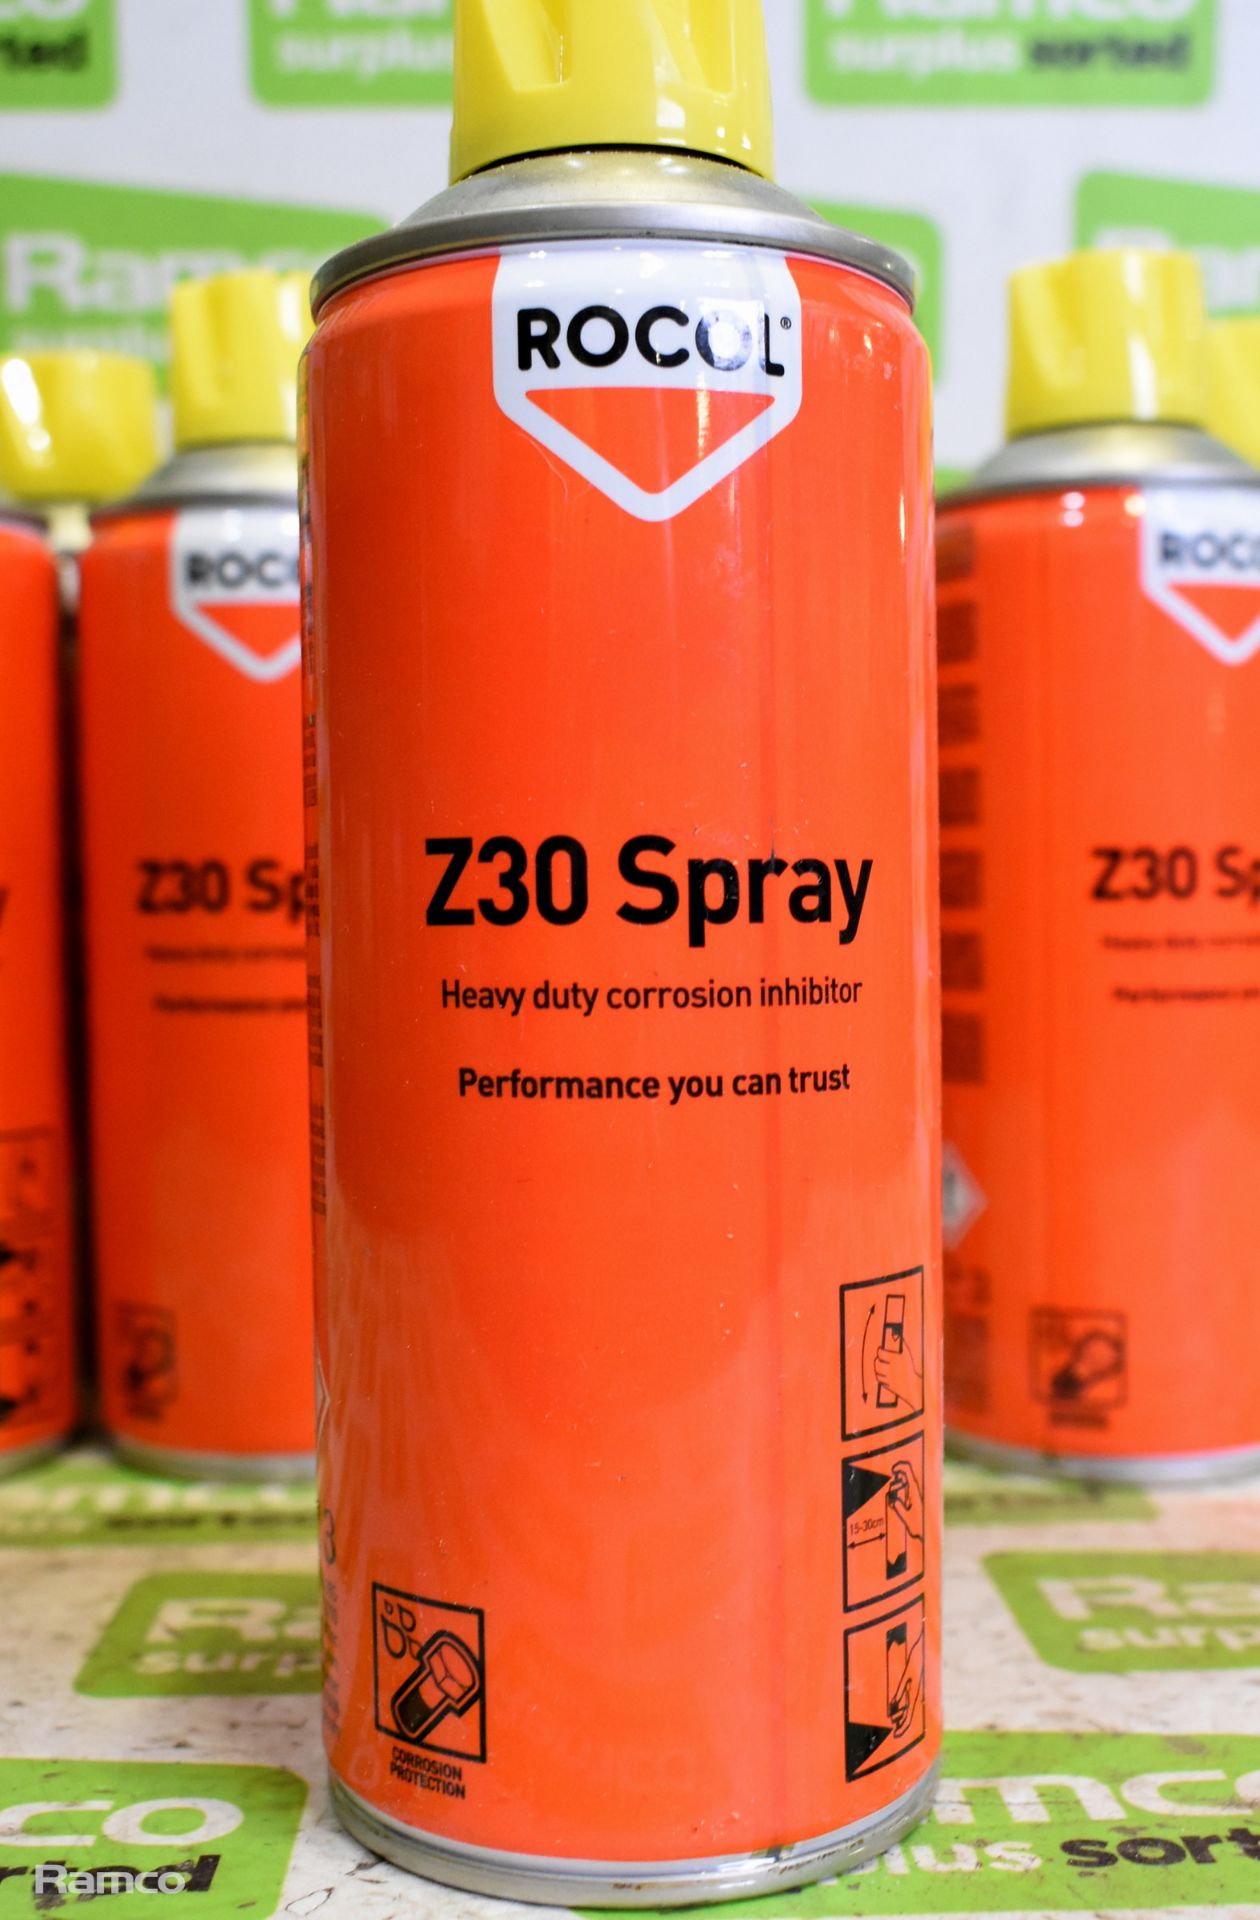 10x cans of Rocol Z30 heavy duty corrosion inhibitor 300ml - Image 2 of 4